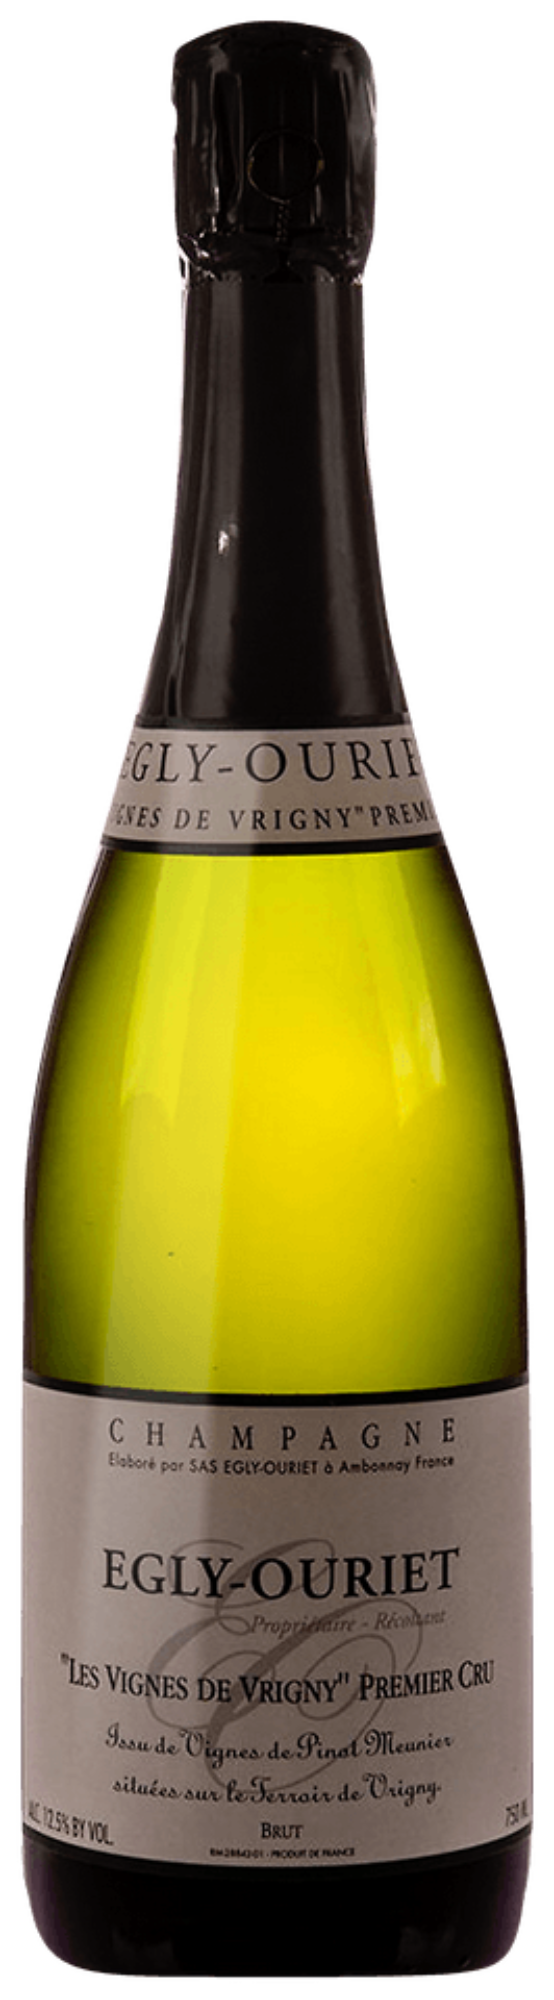 Champagne Egly-Ouriet 